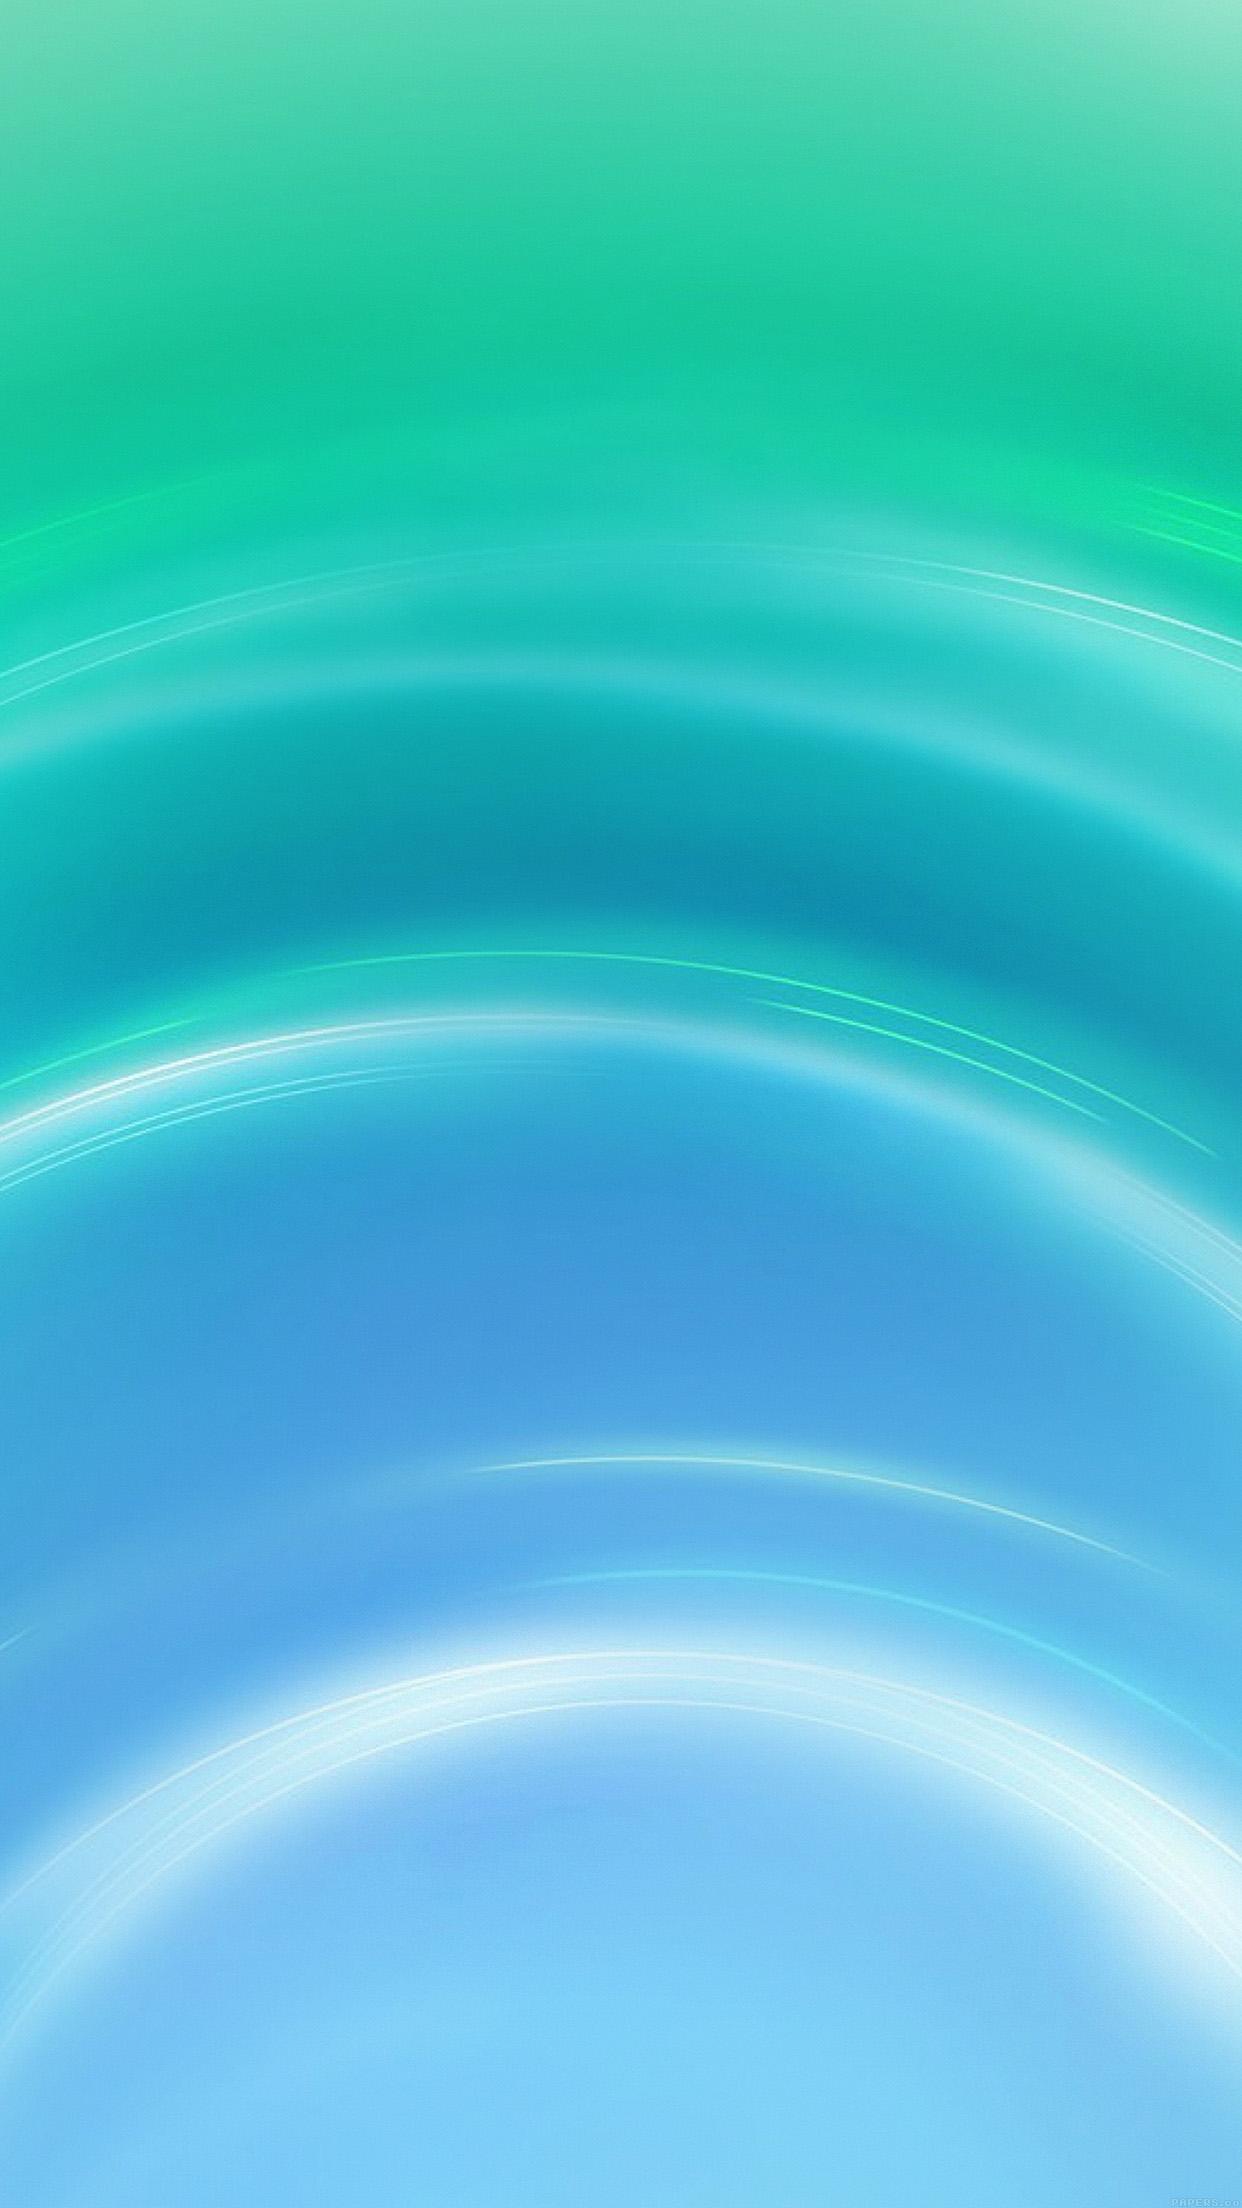 Circle Blue Green Abstract Light Pattern Android wallpaper